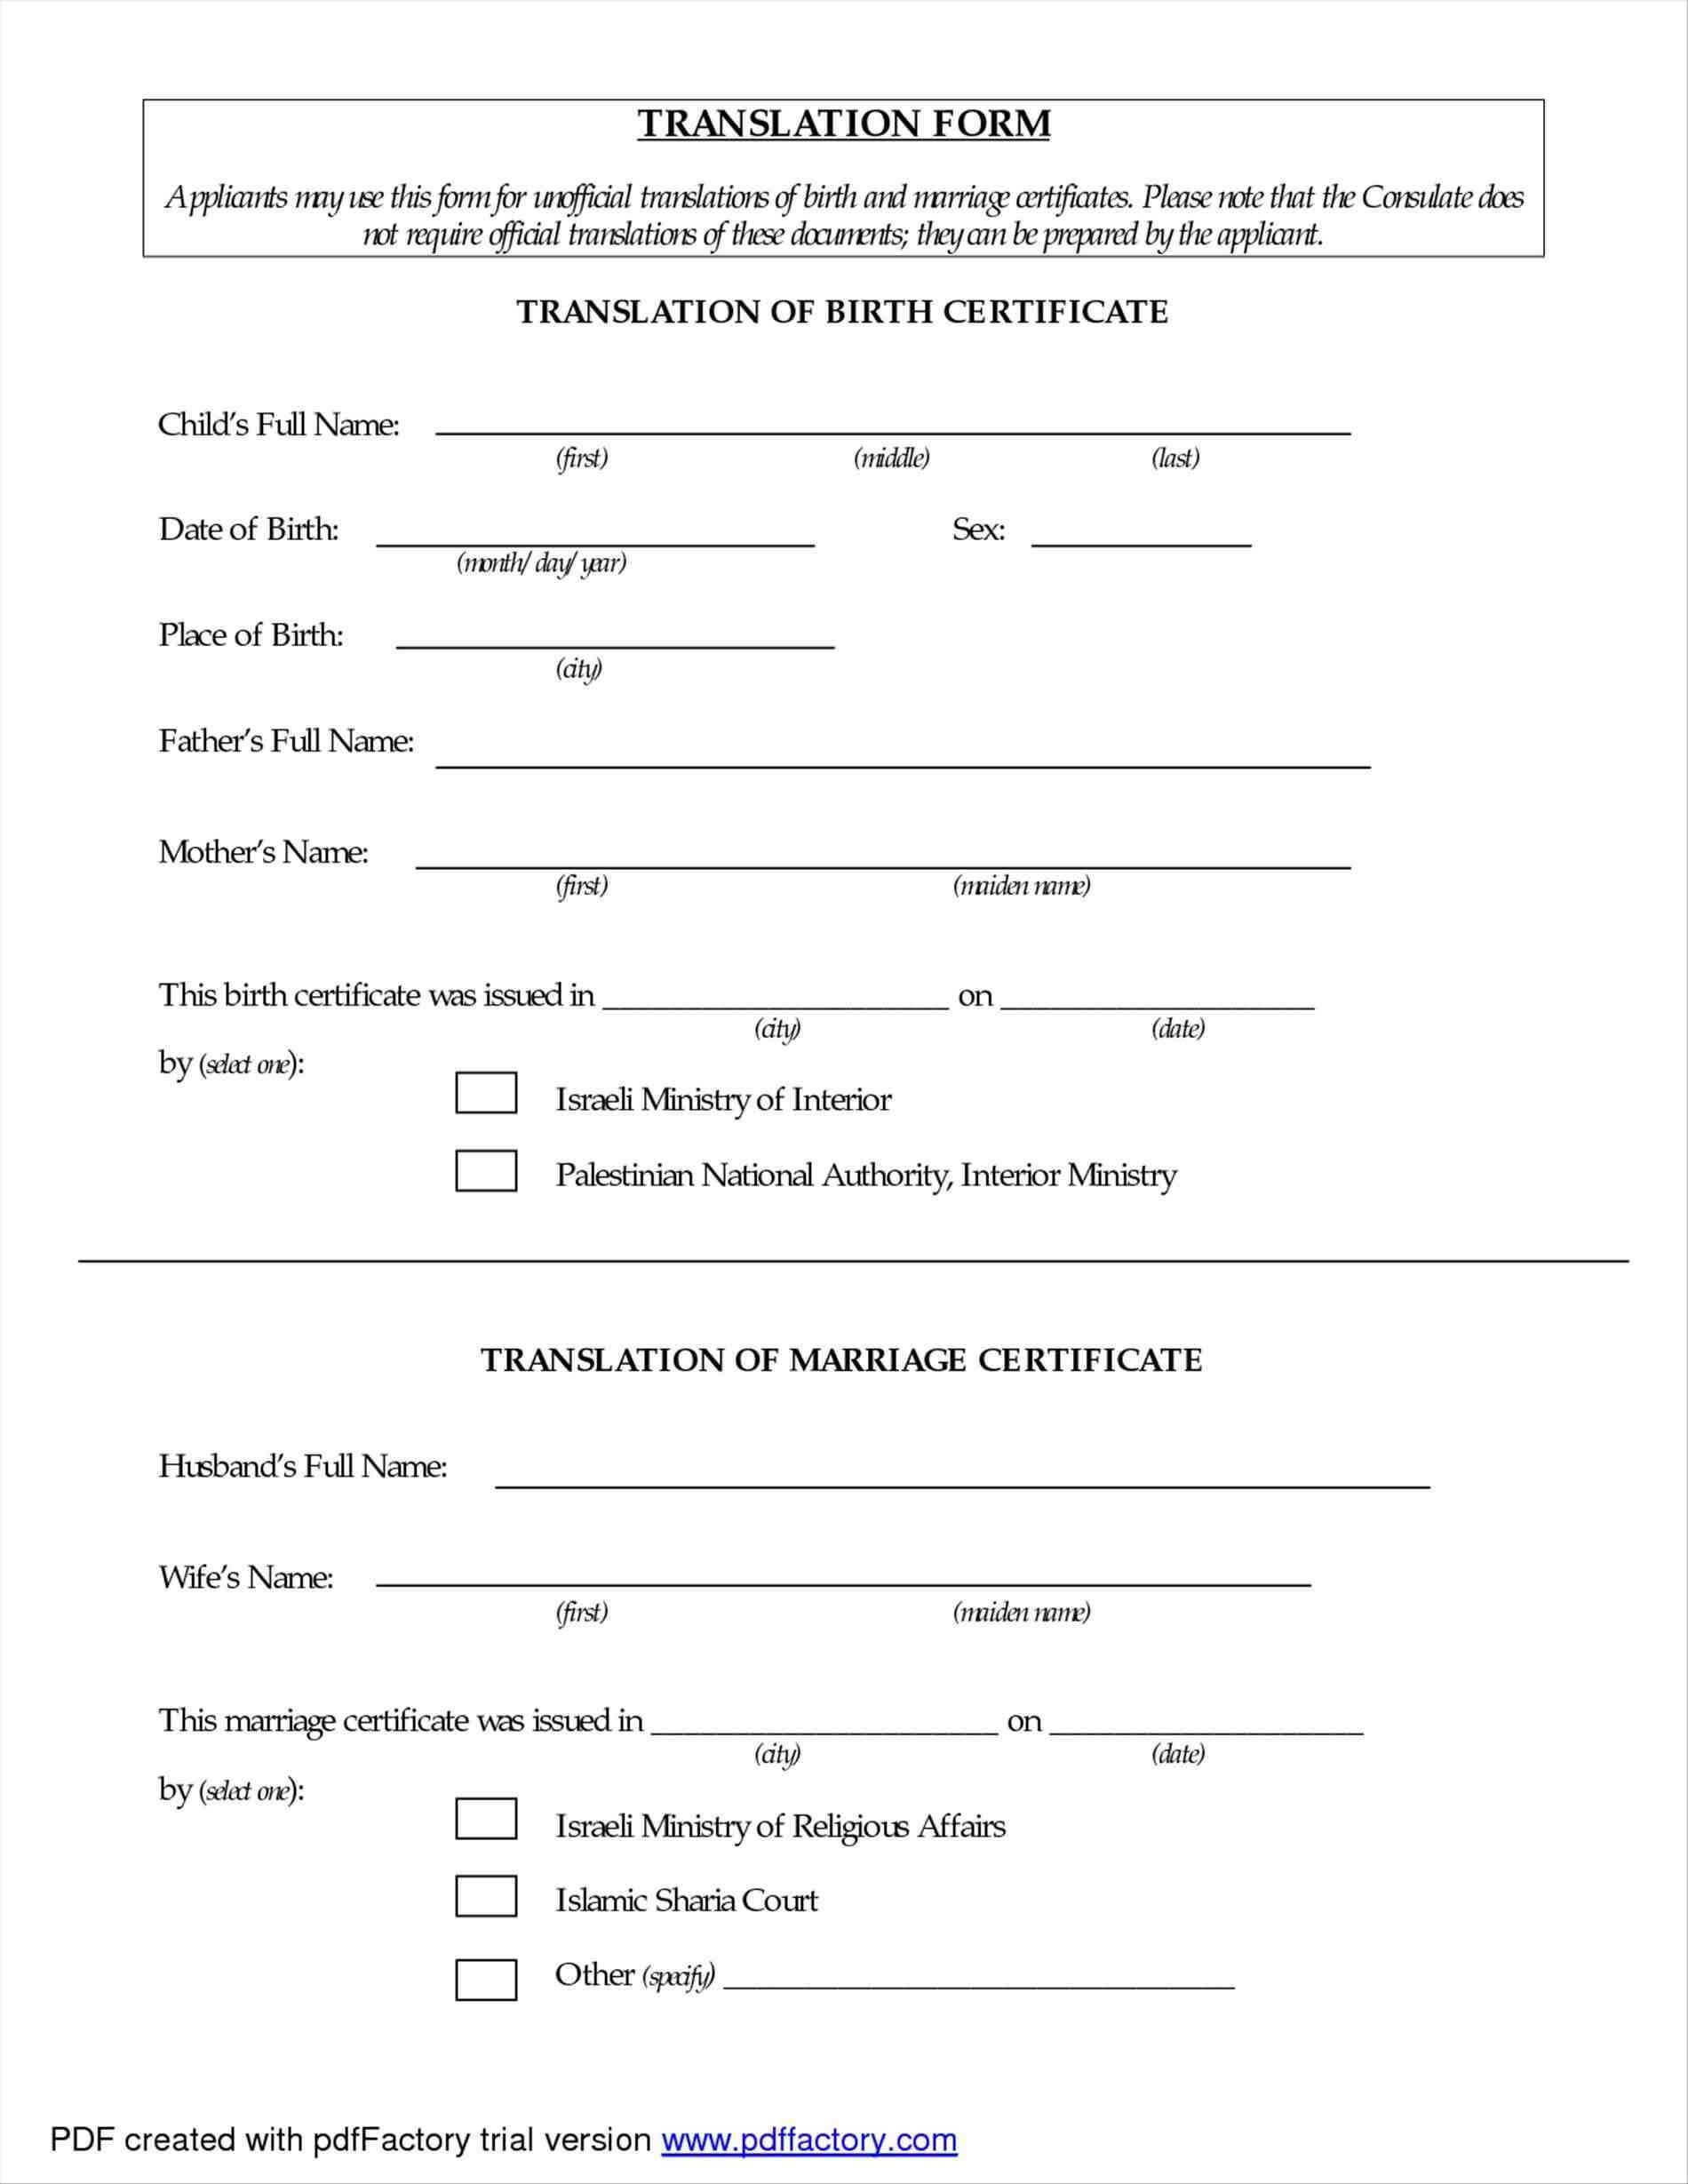 025 Unabridged Marriage Certificate Sample Of Template Throughout Spanish To English Birth Certificate Translation Template